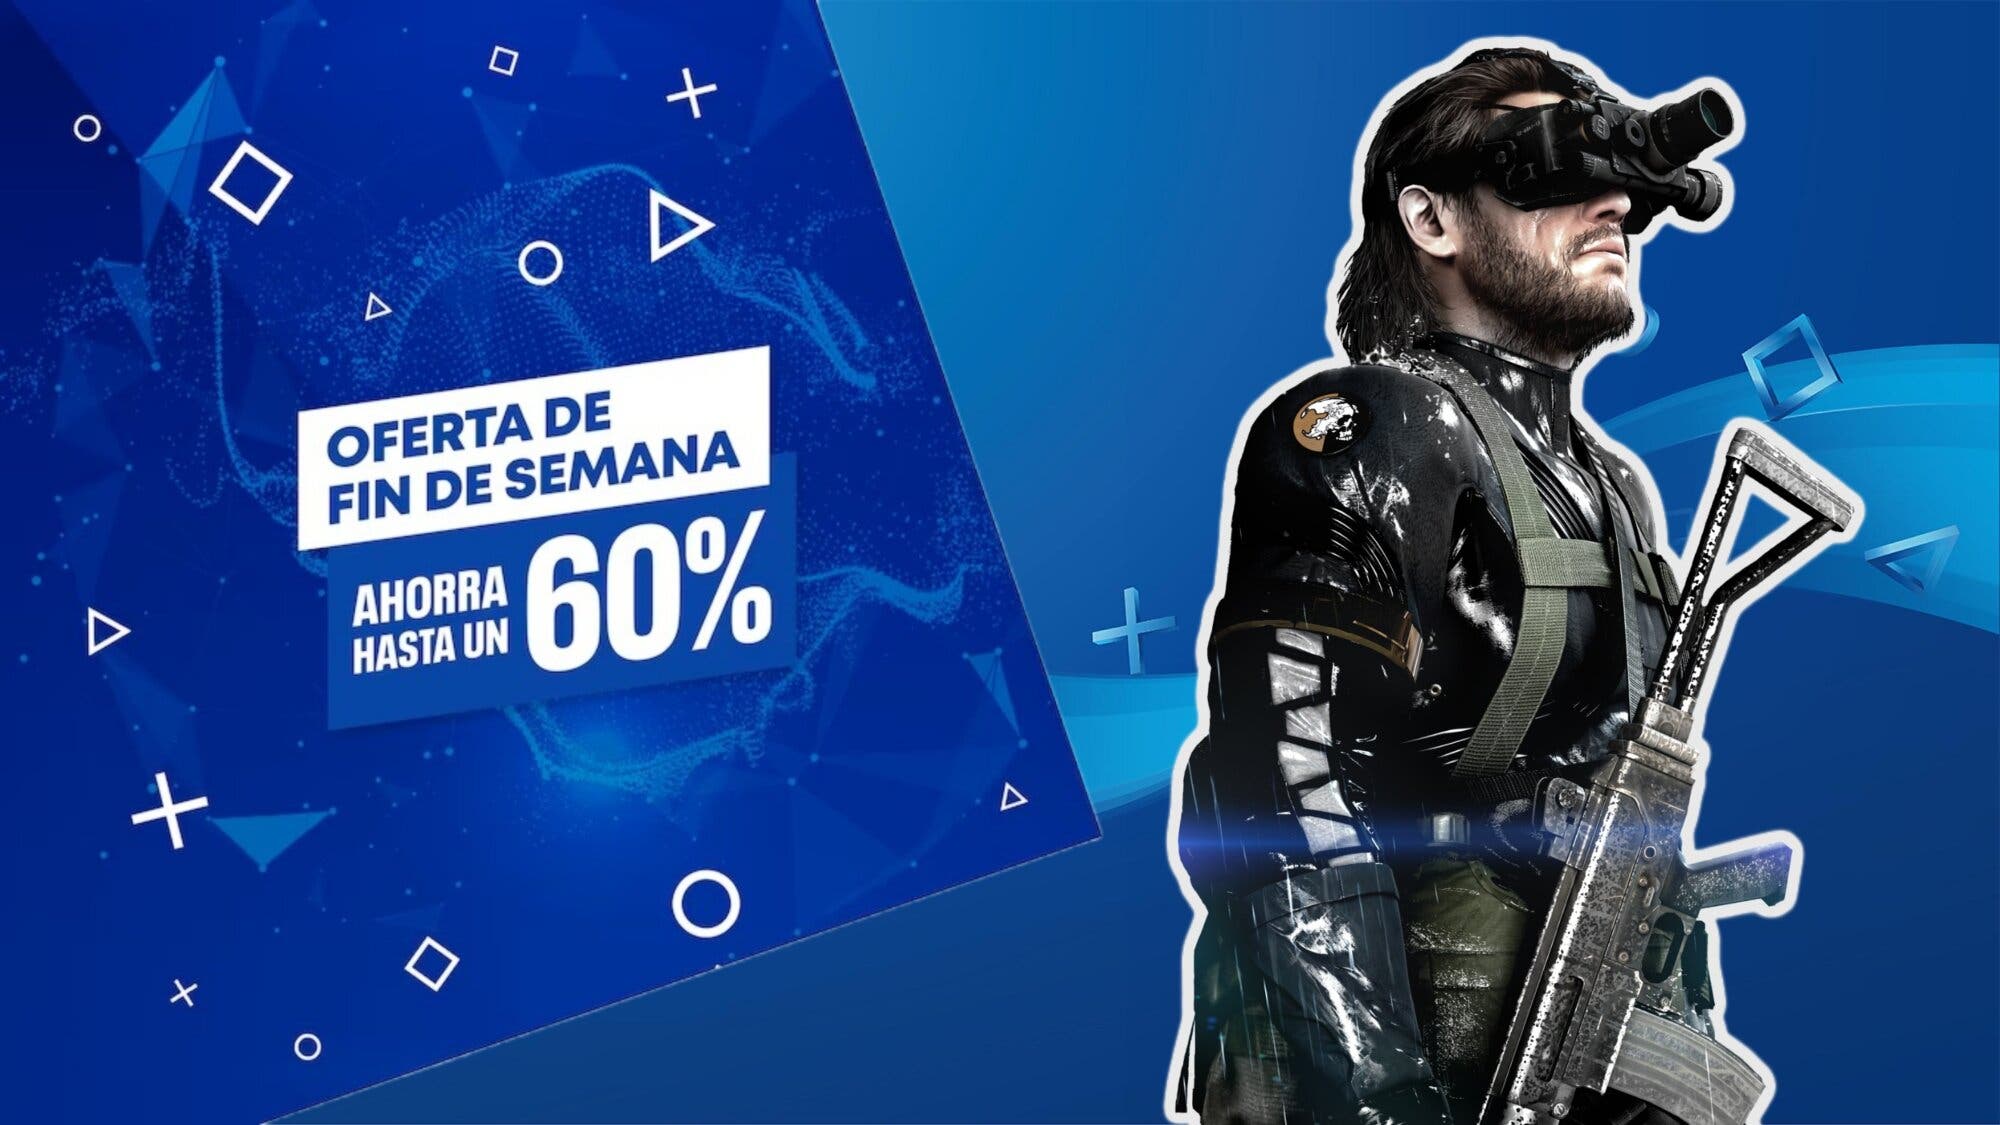 PlayStation announces discounts of up to 60% on the PS Store with its new weekend offers